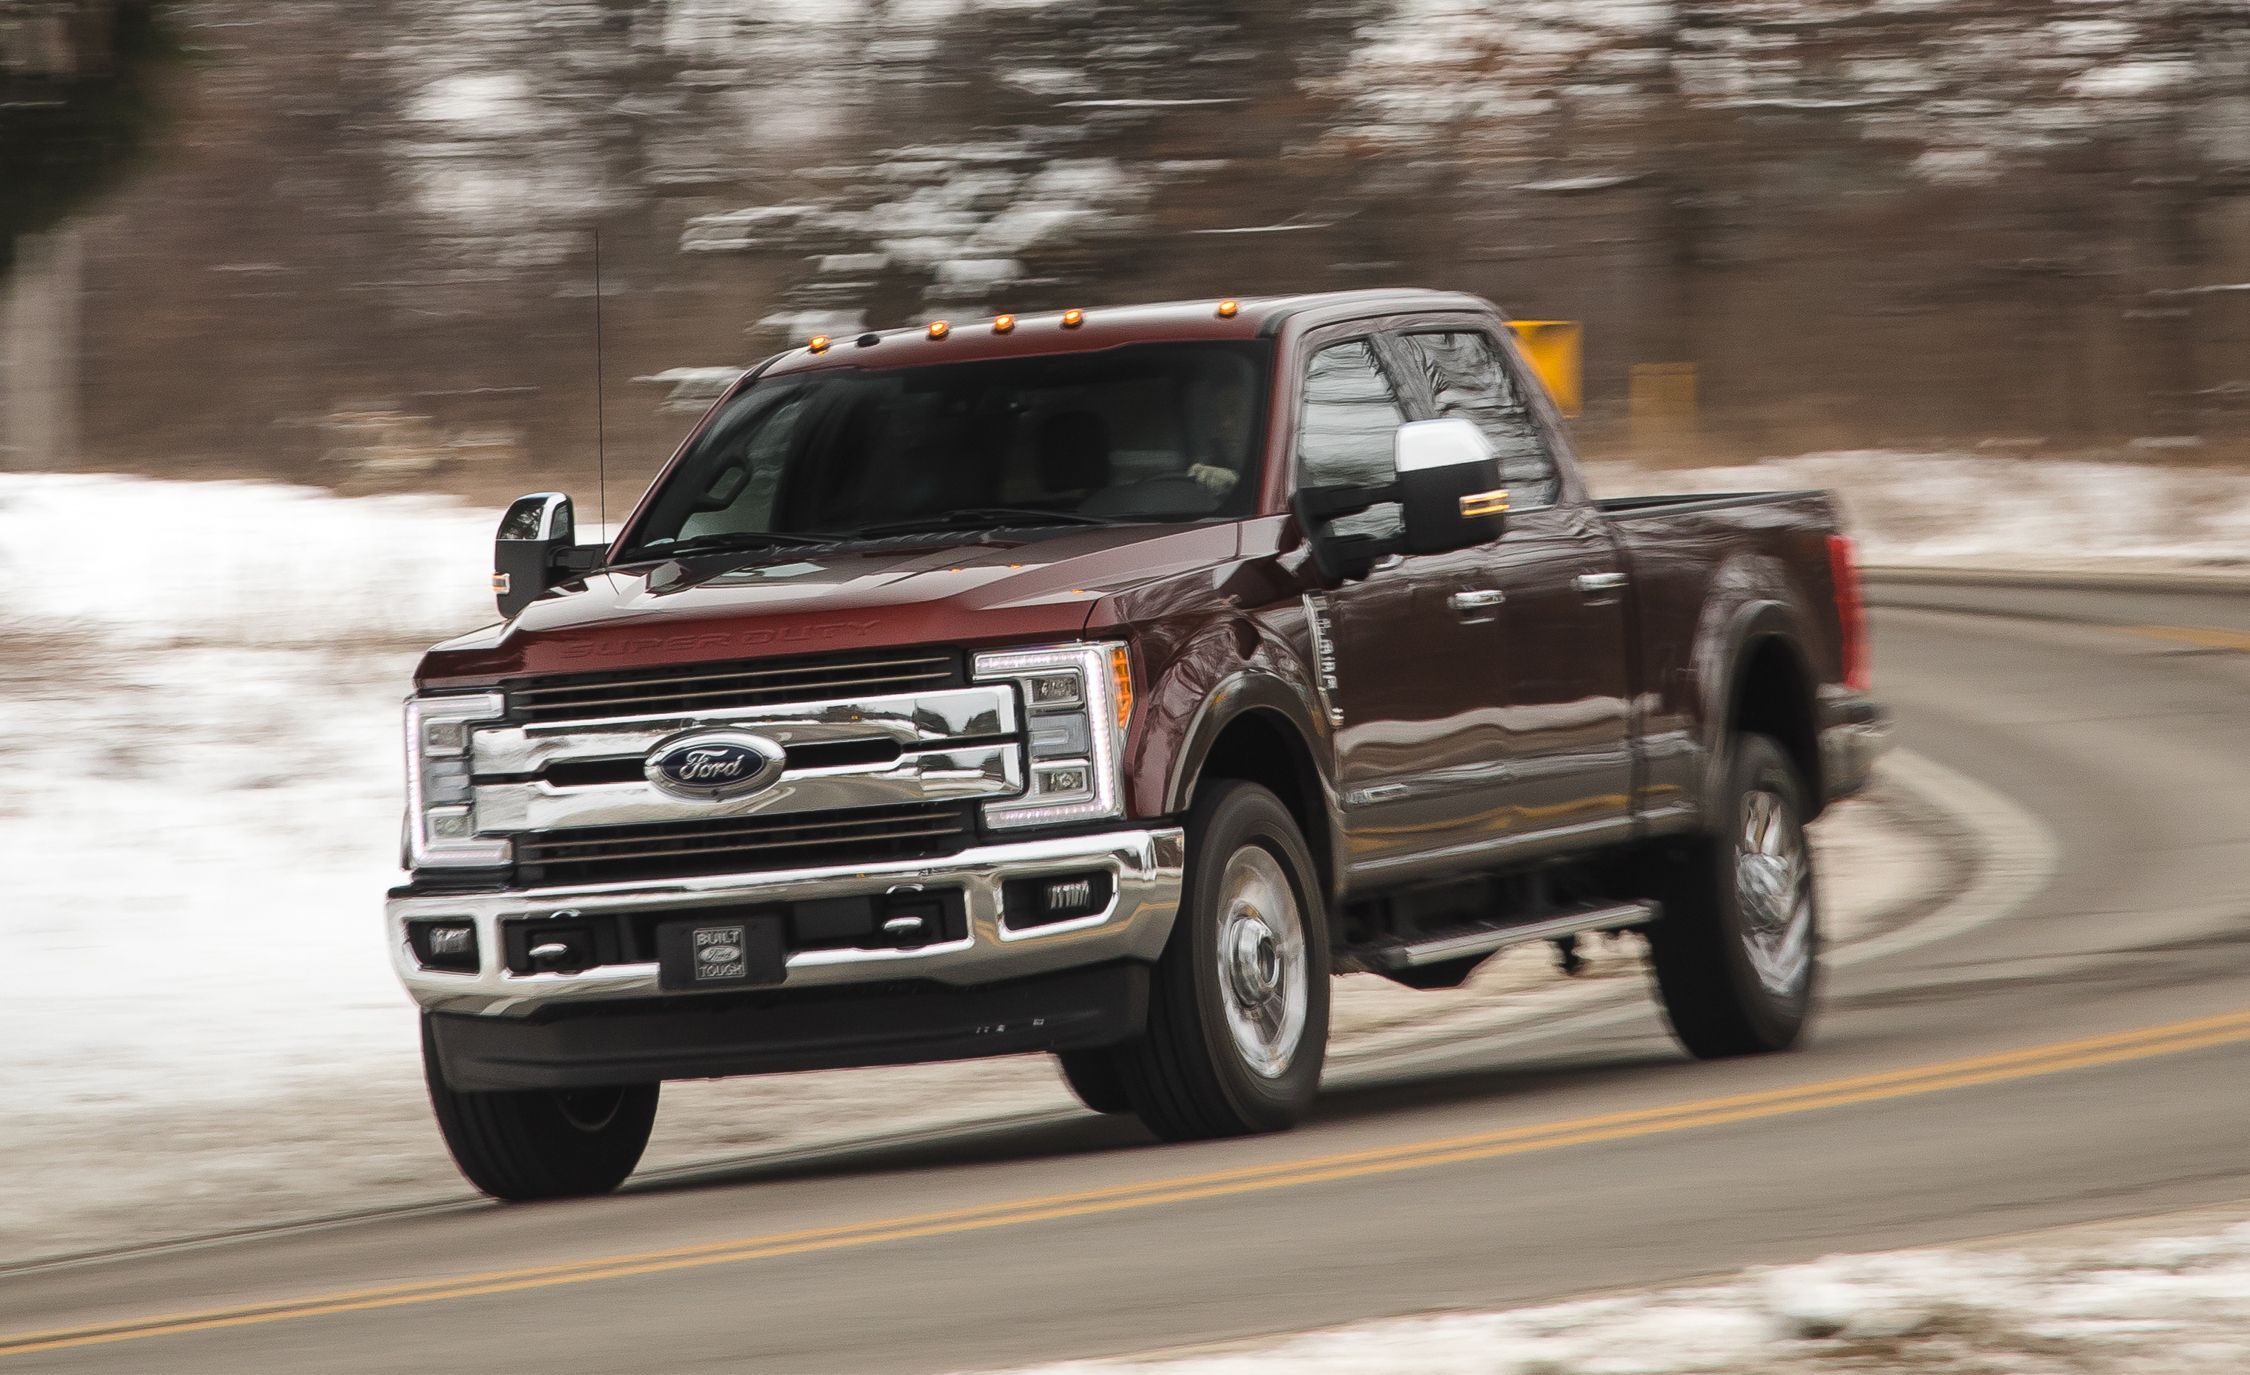 2017 Ford F-350 in motion on a curved road with a snowy background